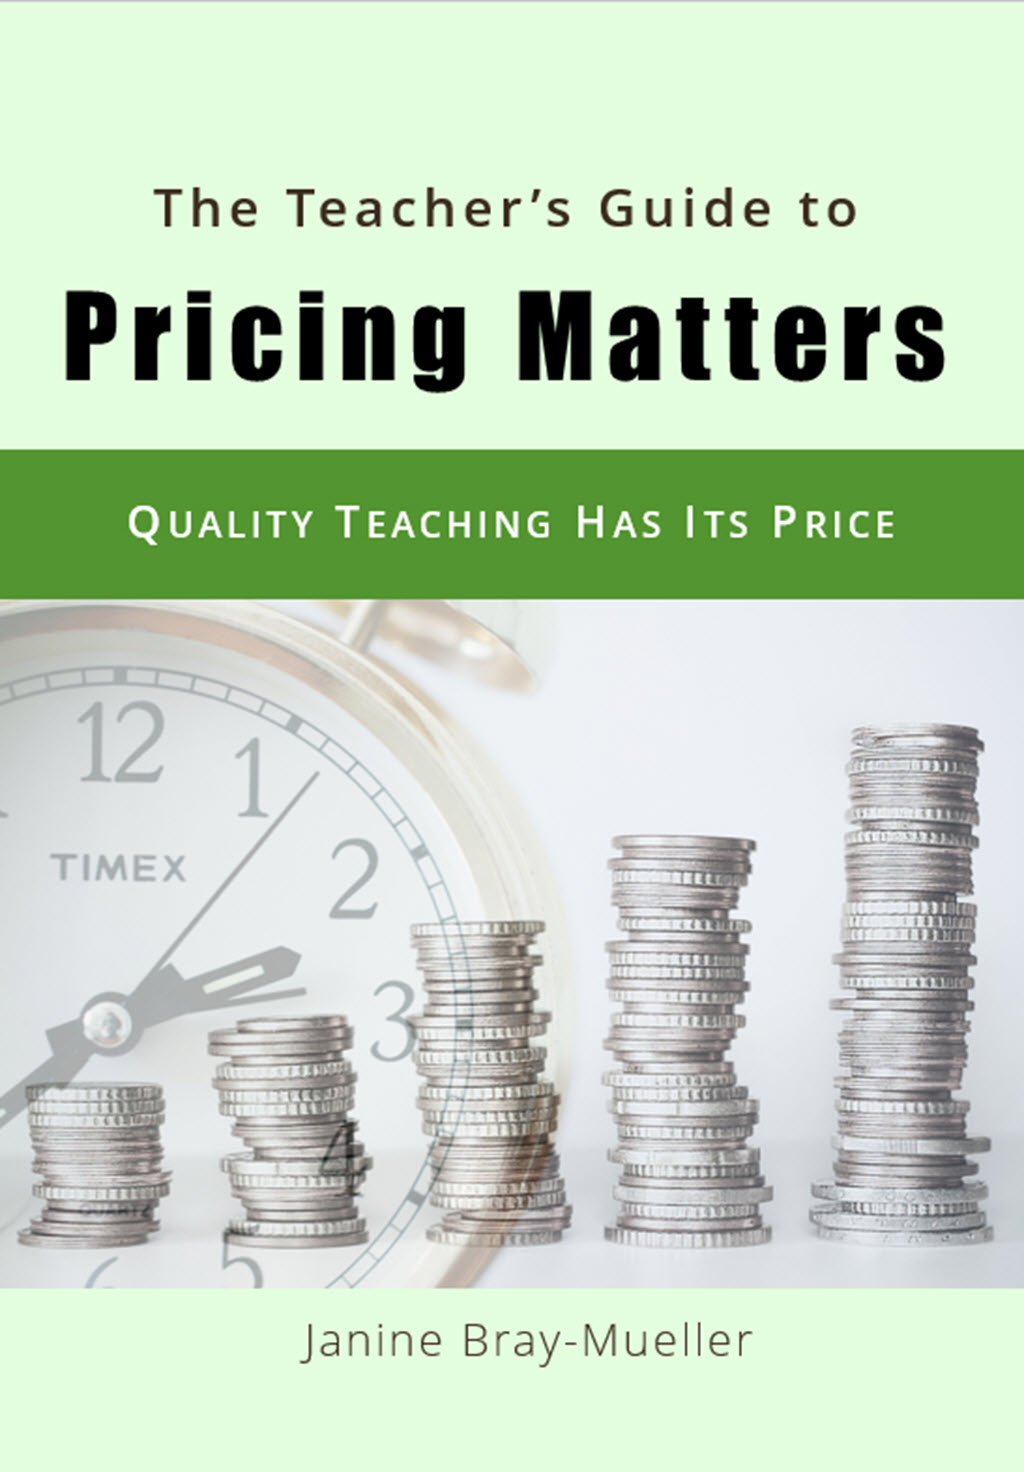 TEST The Teacher's Guide to Pricing Matters Janine Bray-Müller Book Cover